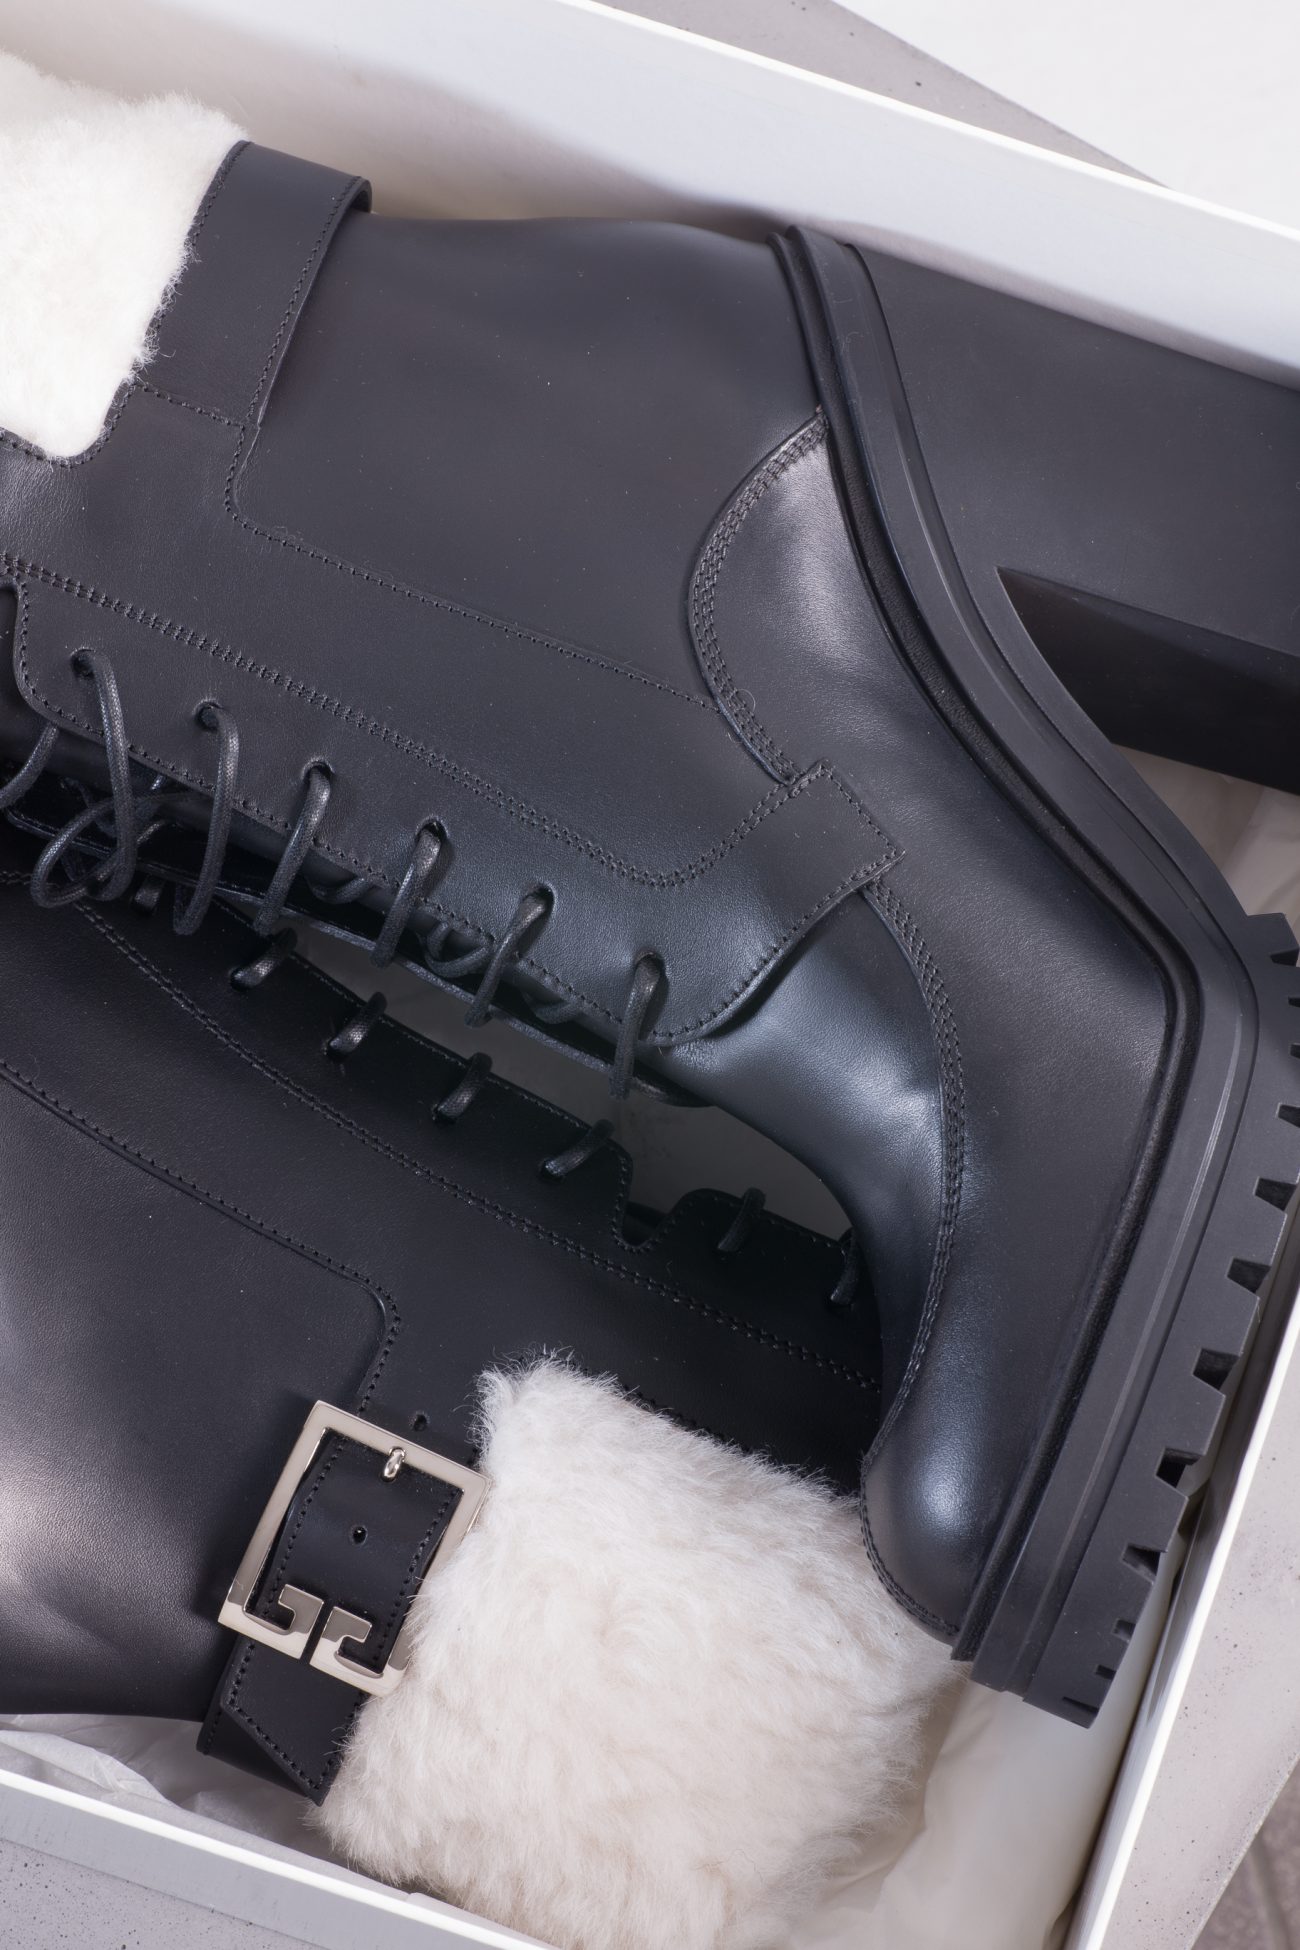 Givenchy Aviator shearling-trimmed leather ankle boots in black